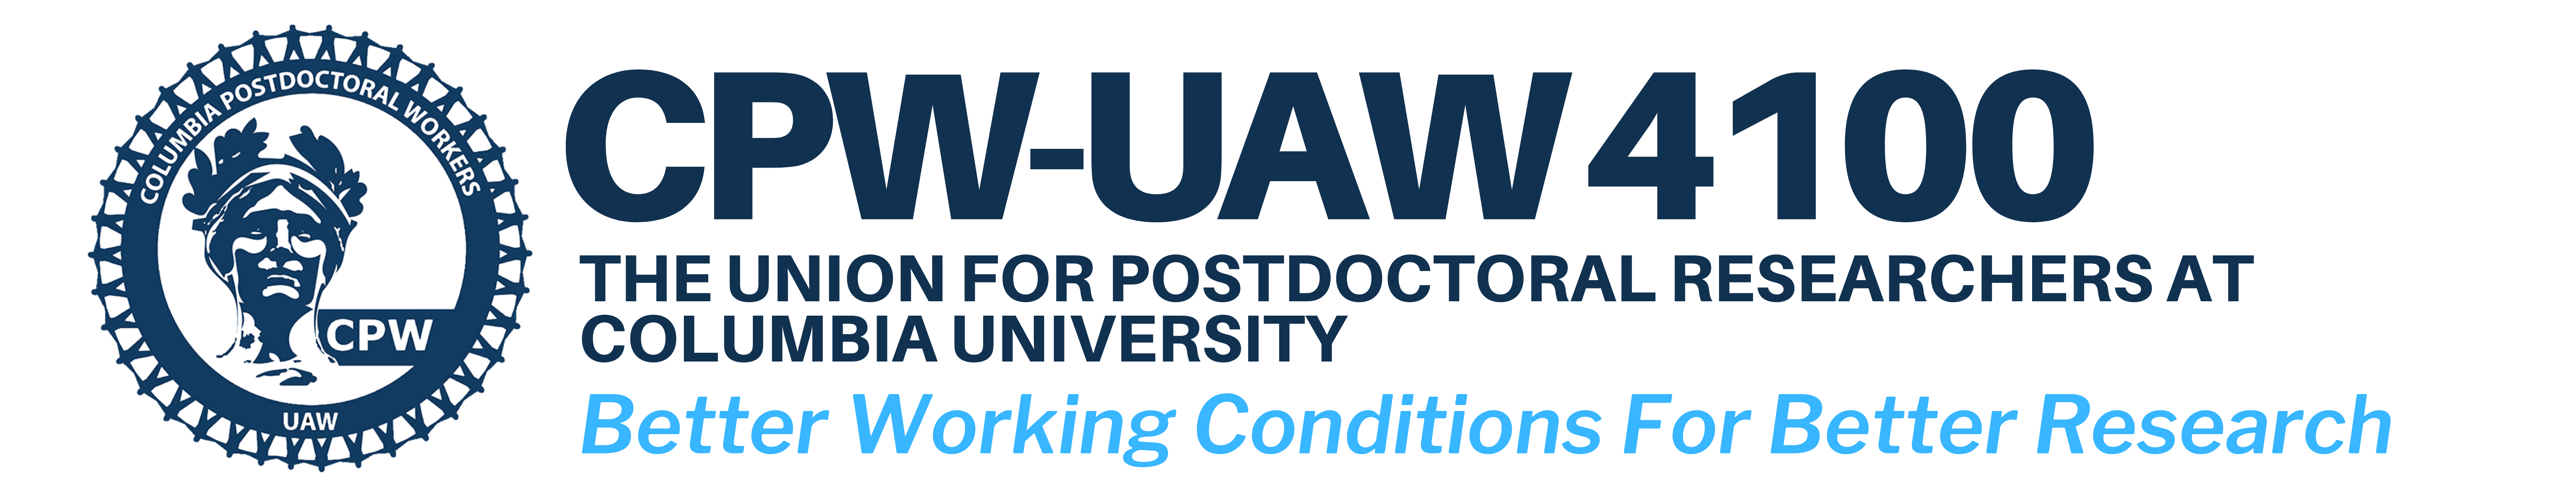 Columbia Postdoctoral Workers